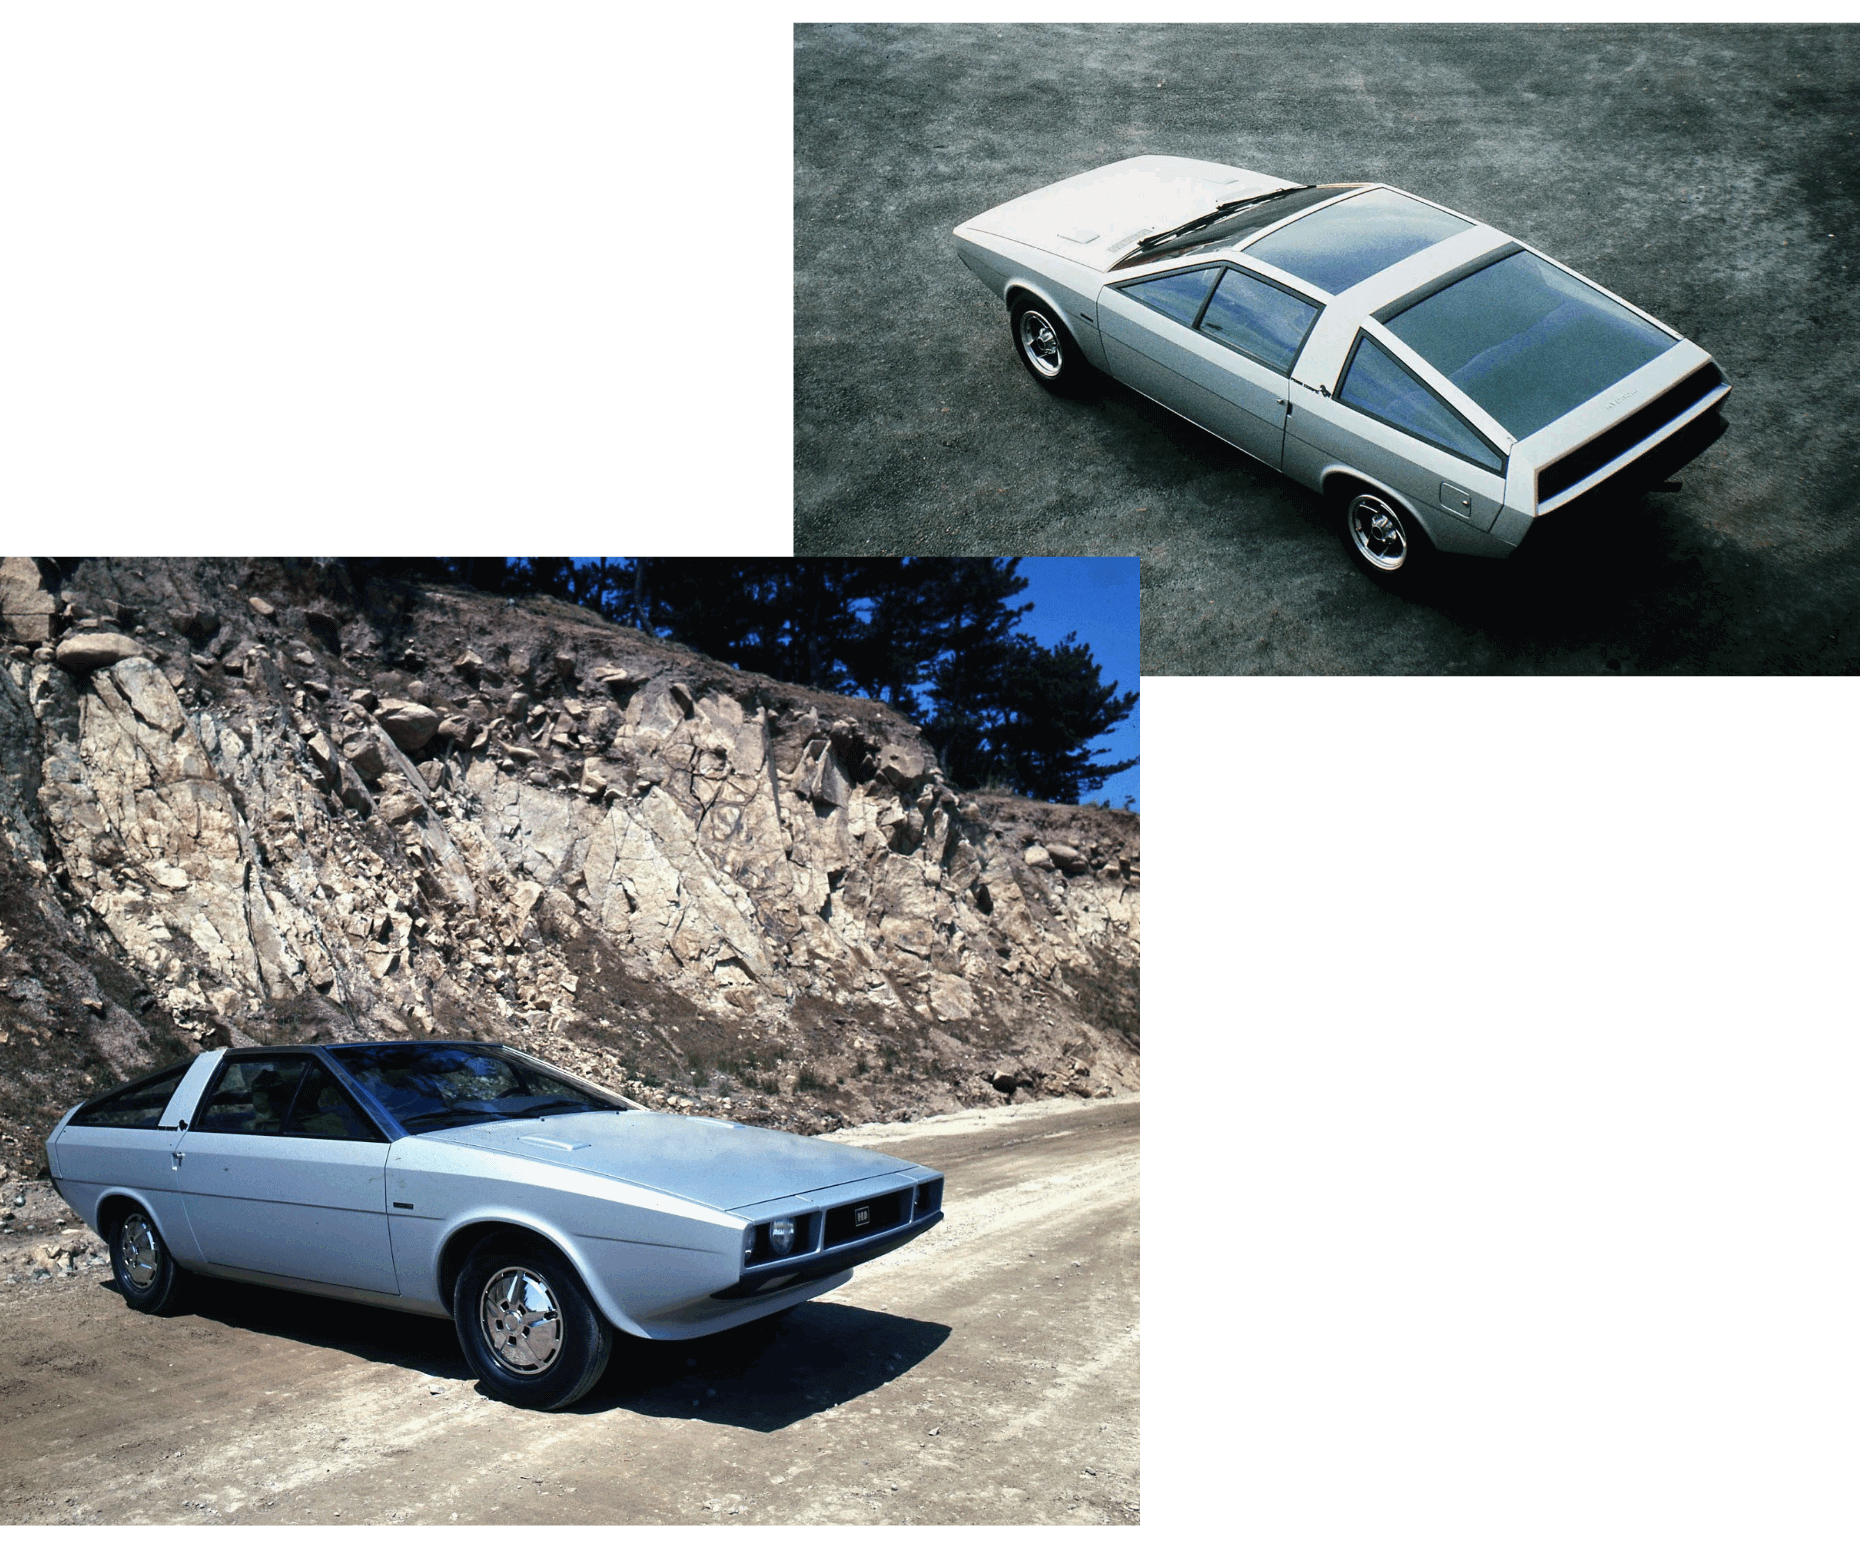 The Hyundai Pony Coupe Concept unveiled in 1974